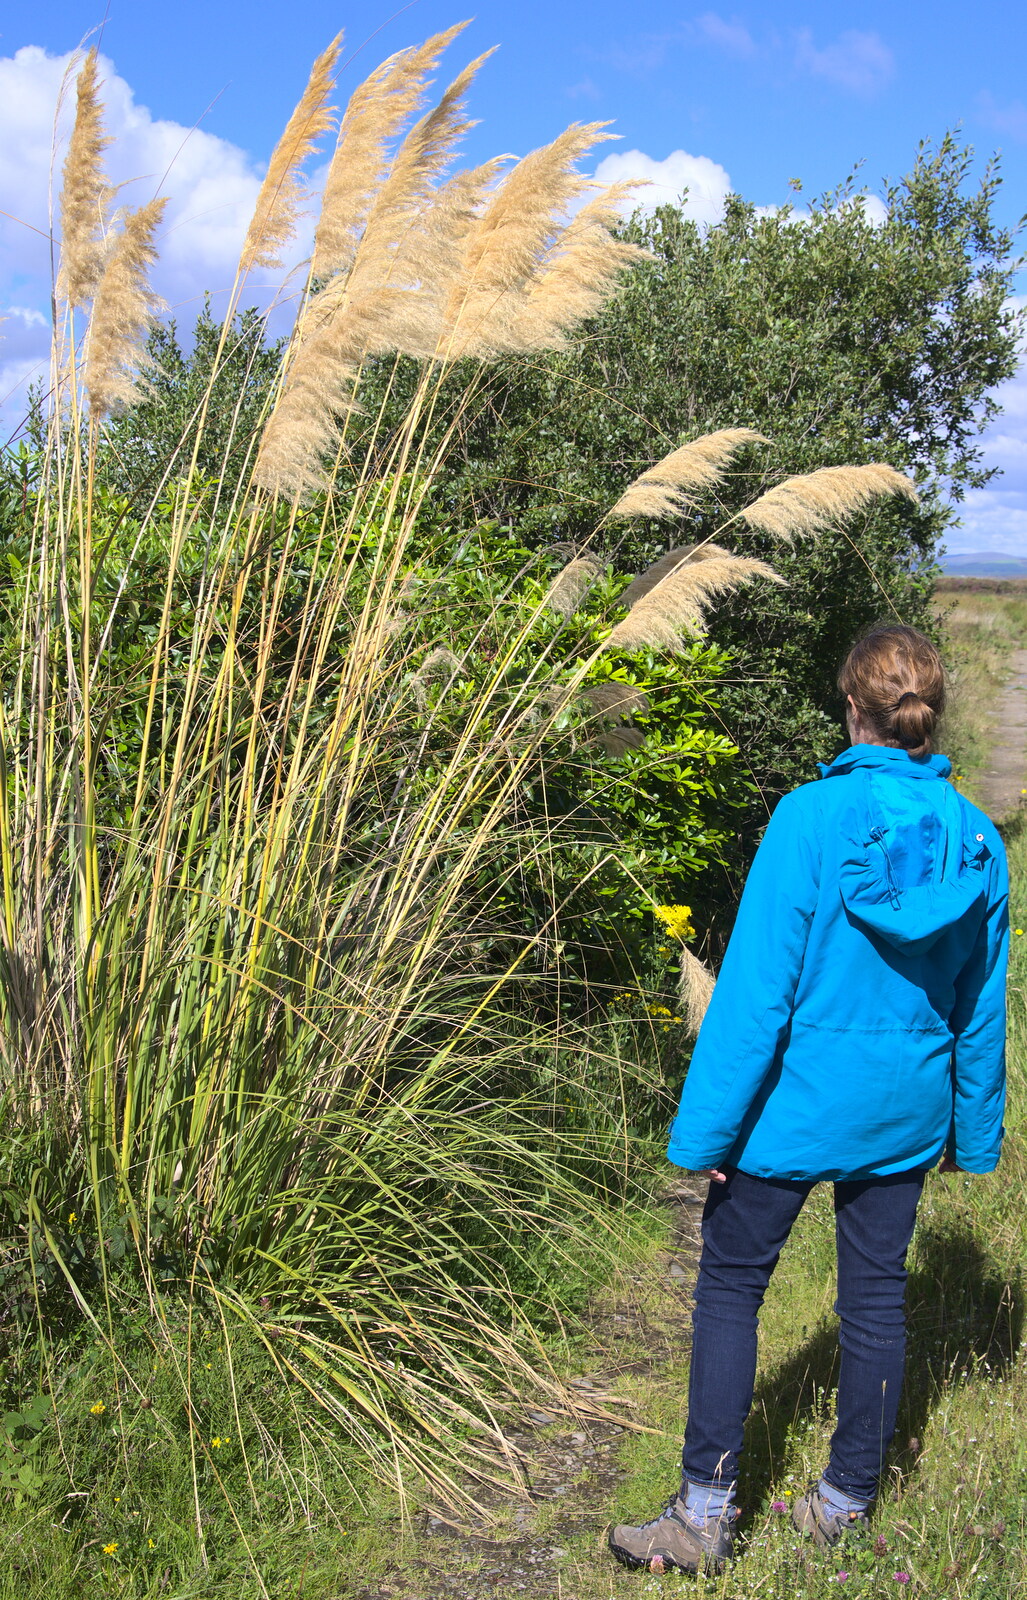 Isobel looks at some pampas grass from Surfing Achill Island, Oileán Acla, Maigh Eo, Ireland - 8th August 2017